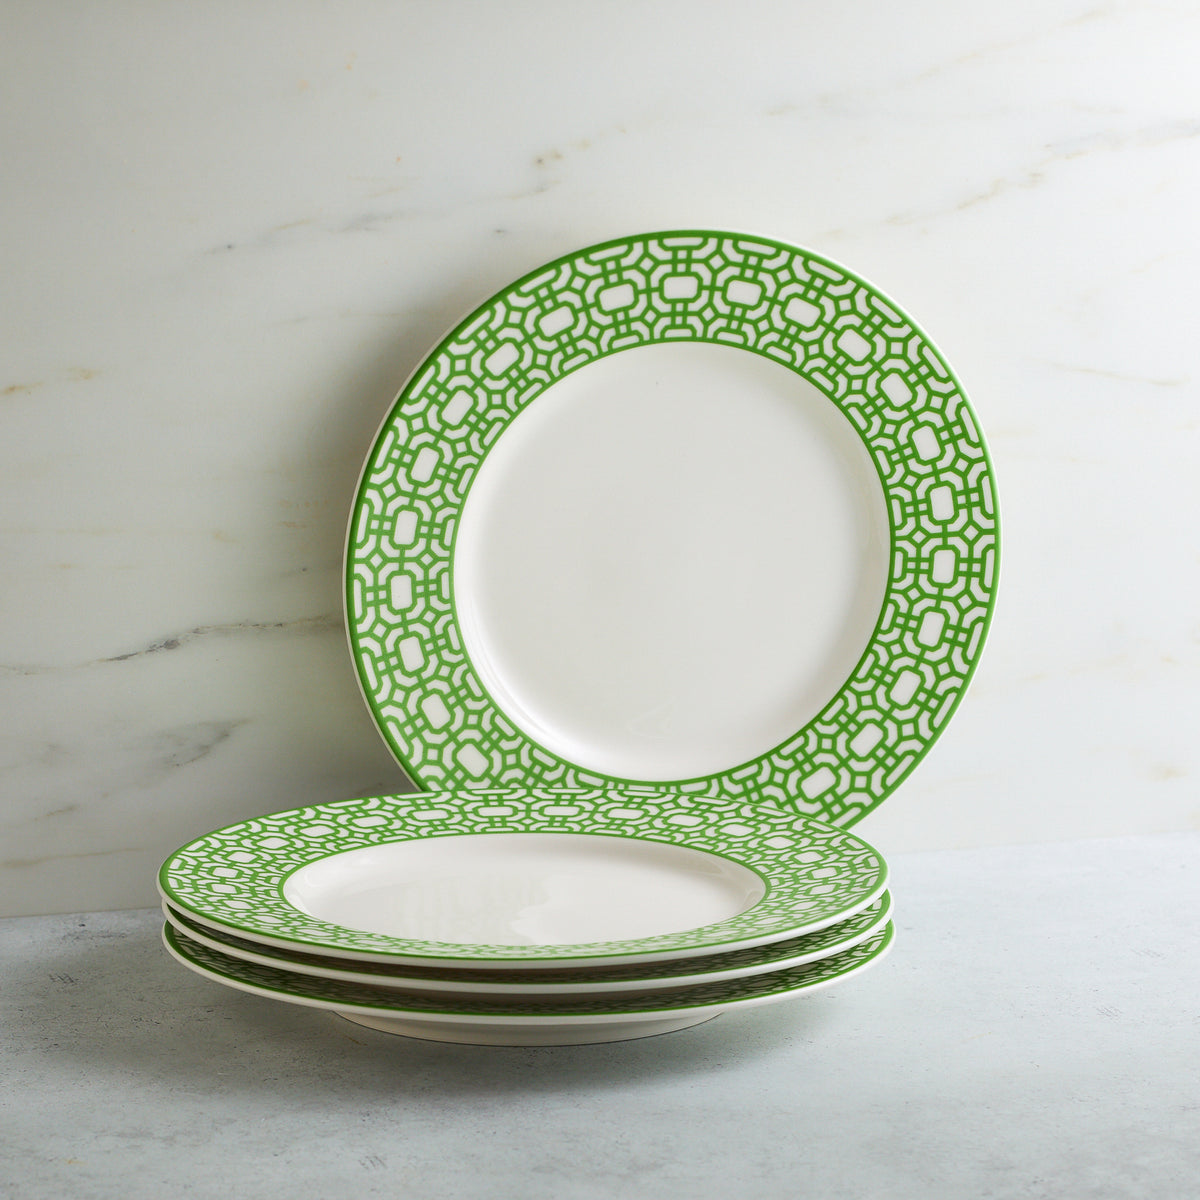 A stack of four Newport Garden Gate Verde Rimmed Salad Plate by Caskata Artisanal Home, placed on a light gray surface against a marble background. These porcelain salad plates add a touch of contemporary tableware elegance to any setting.